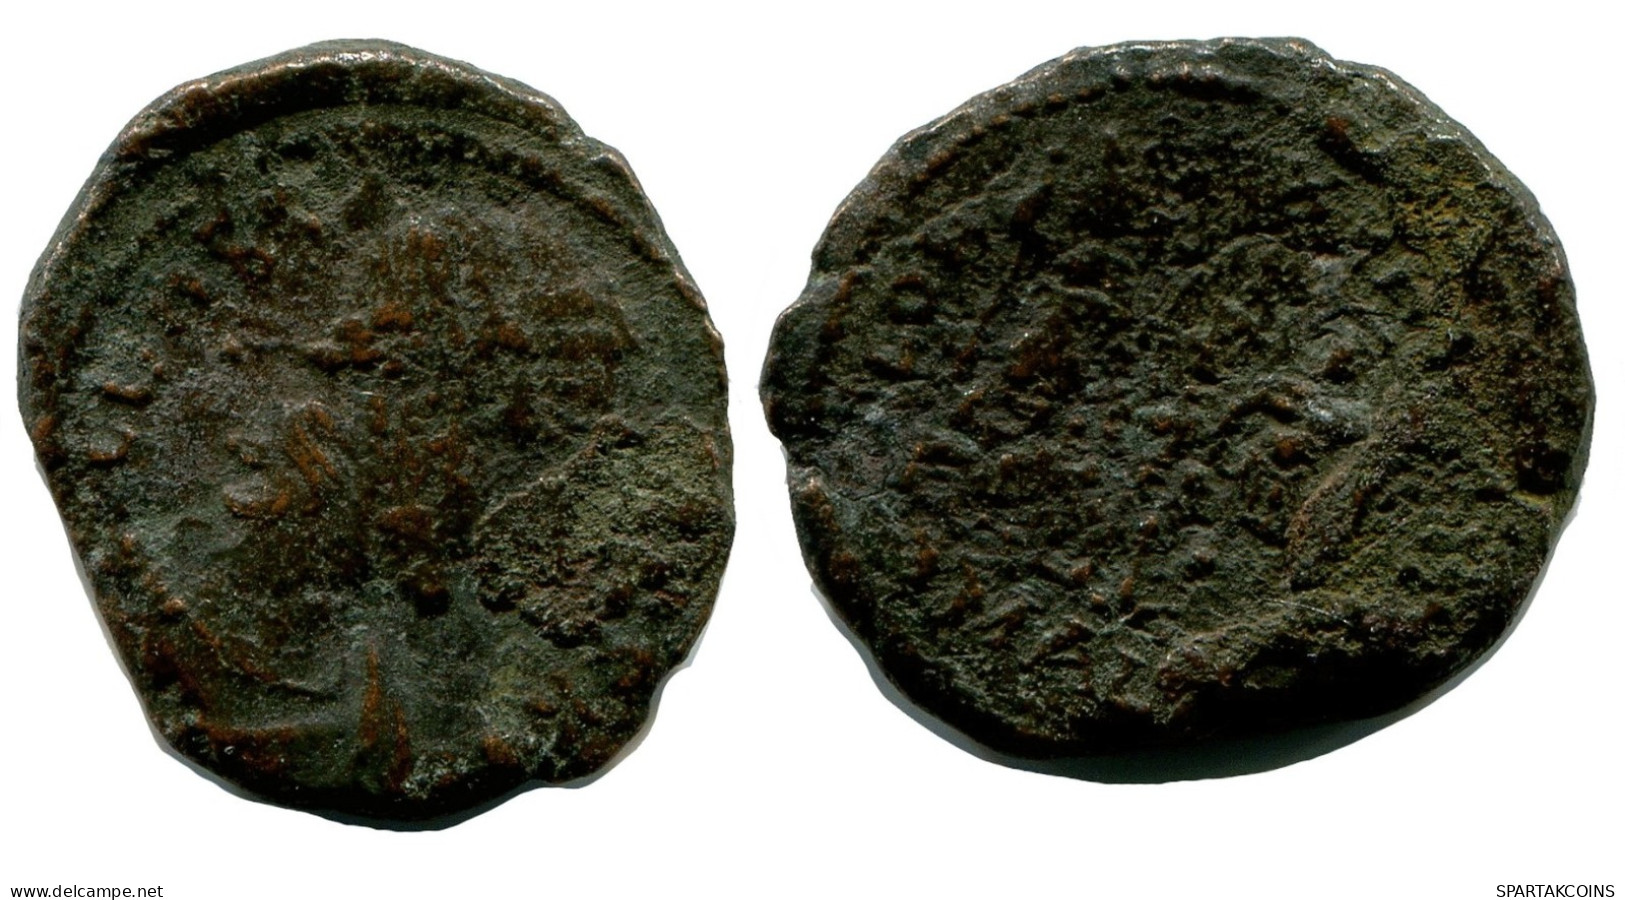 ROMAN Coin MINTED IN ALEKSANDRIA FOUND IN IHNASYAH HOARD EGYPT #ANC10176.14.U.A - The Christian Empire (307 AD To 363 AD)